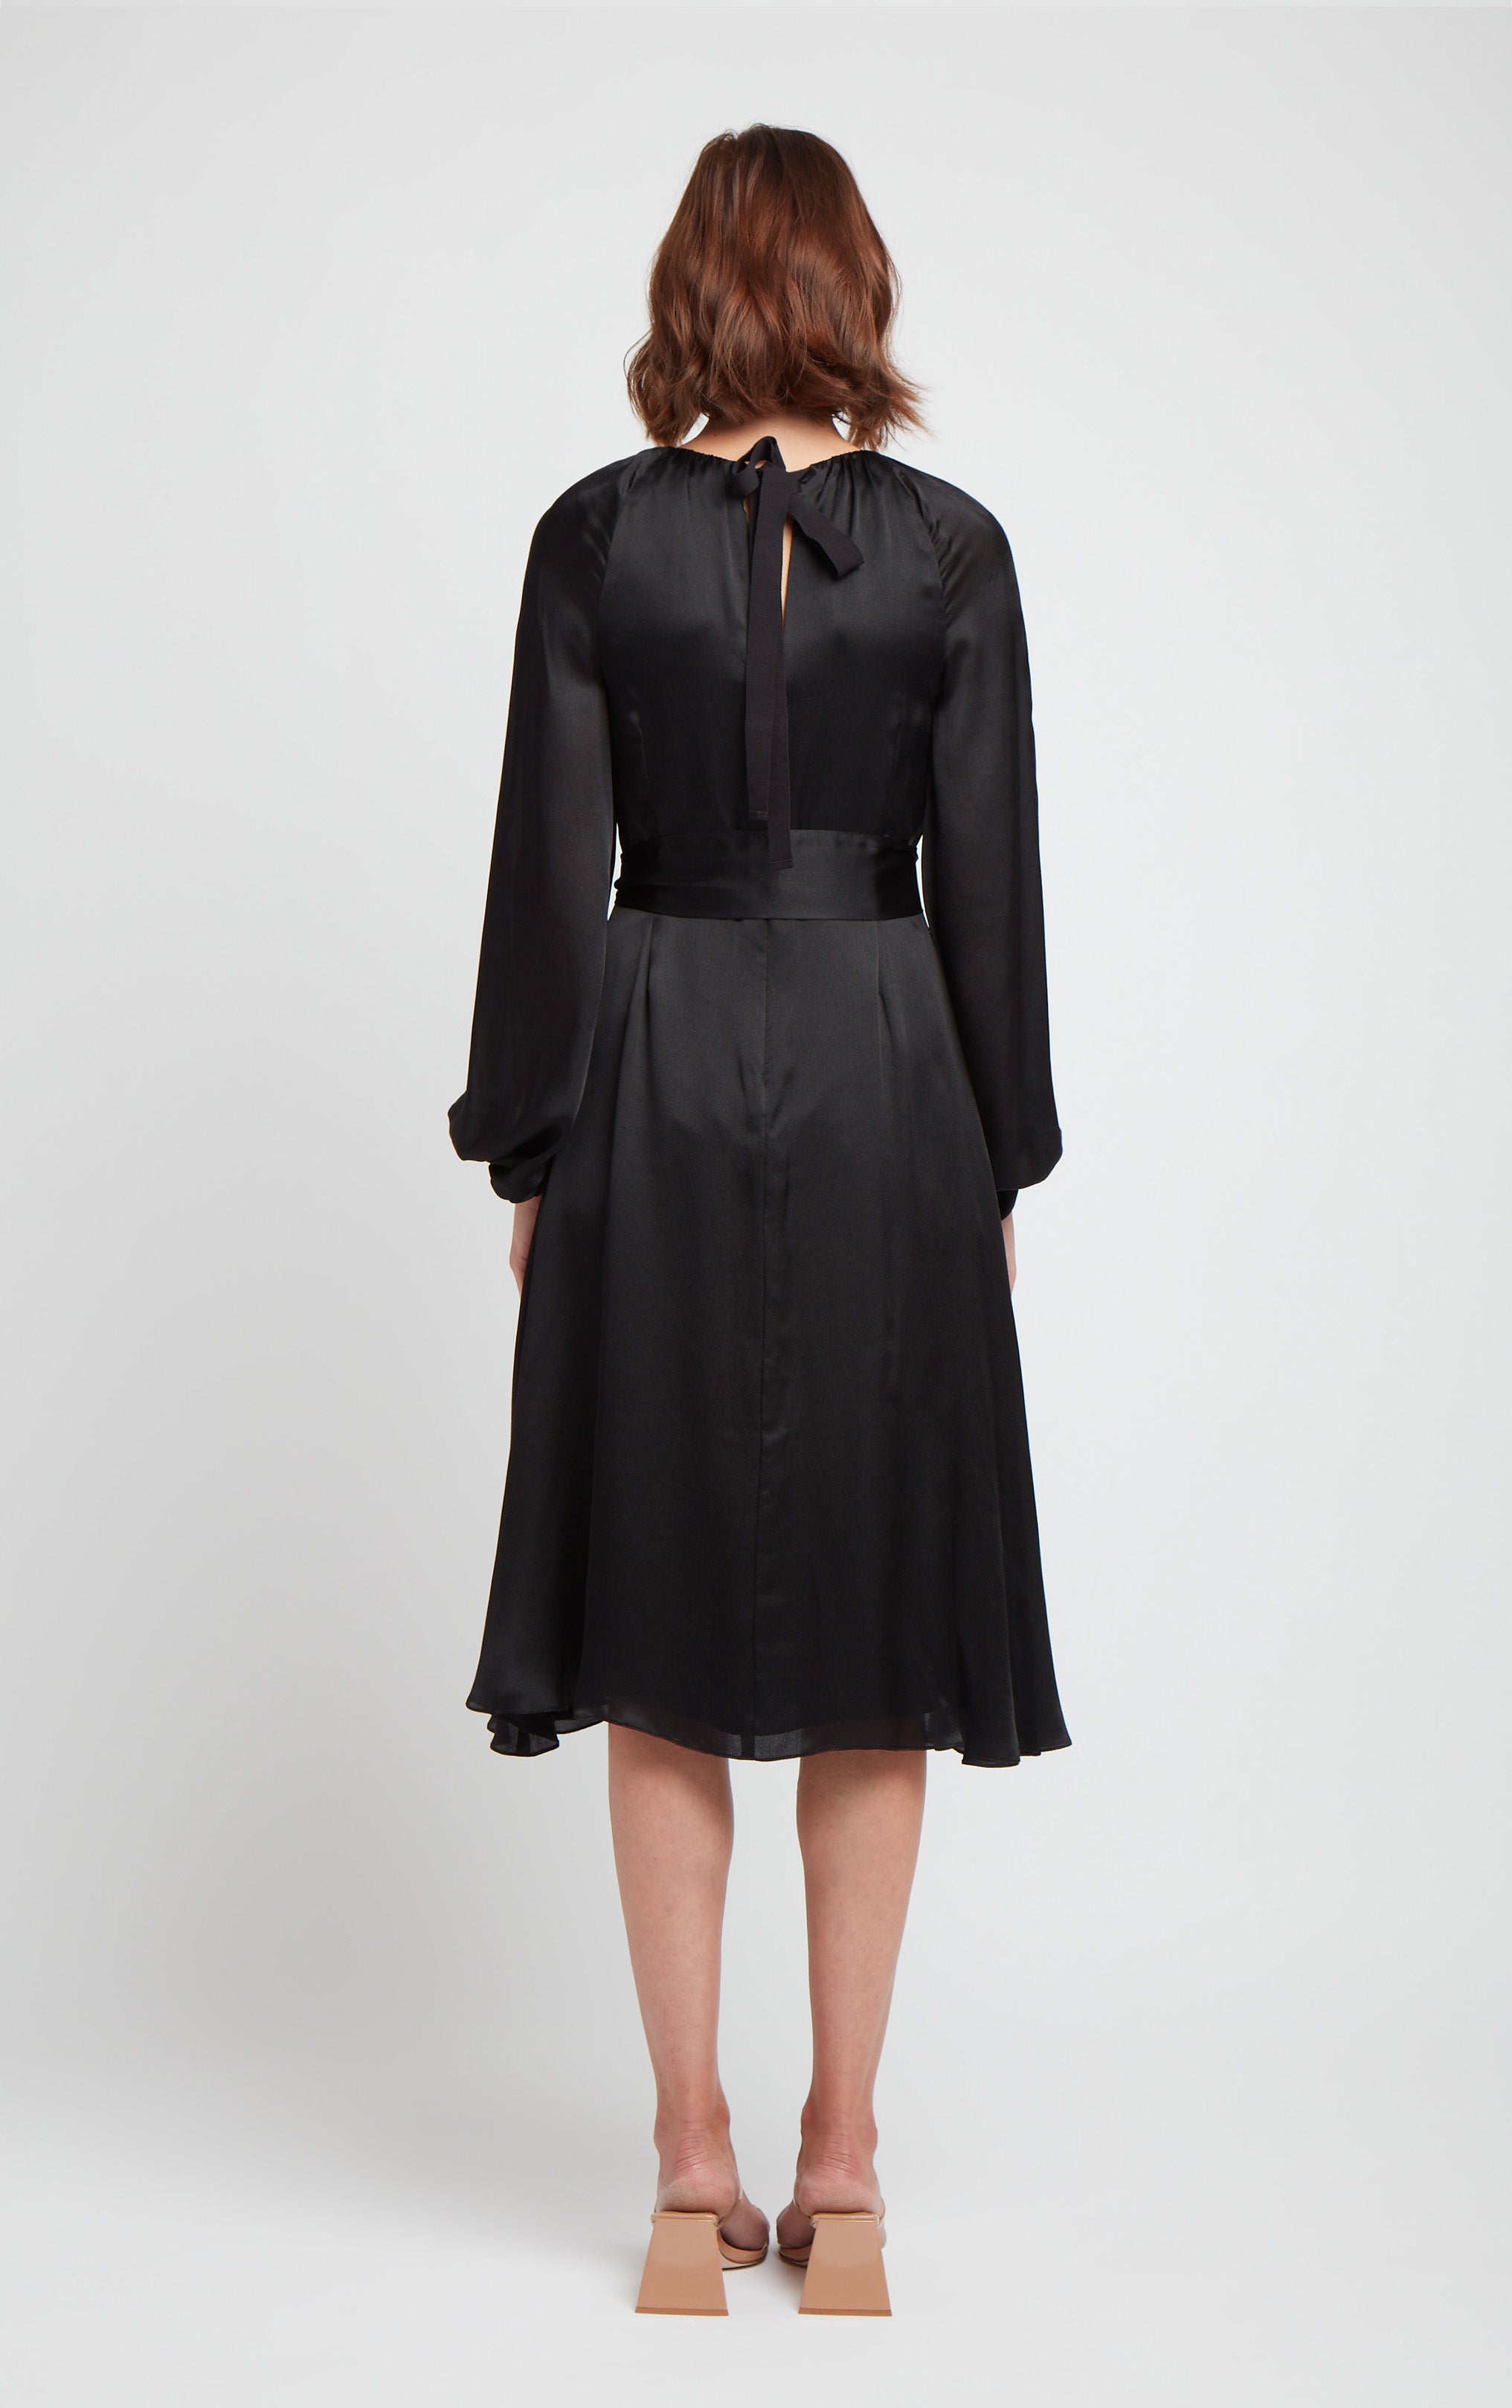 back view of woman wearing black puff sleeve silk dress with rusched neck